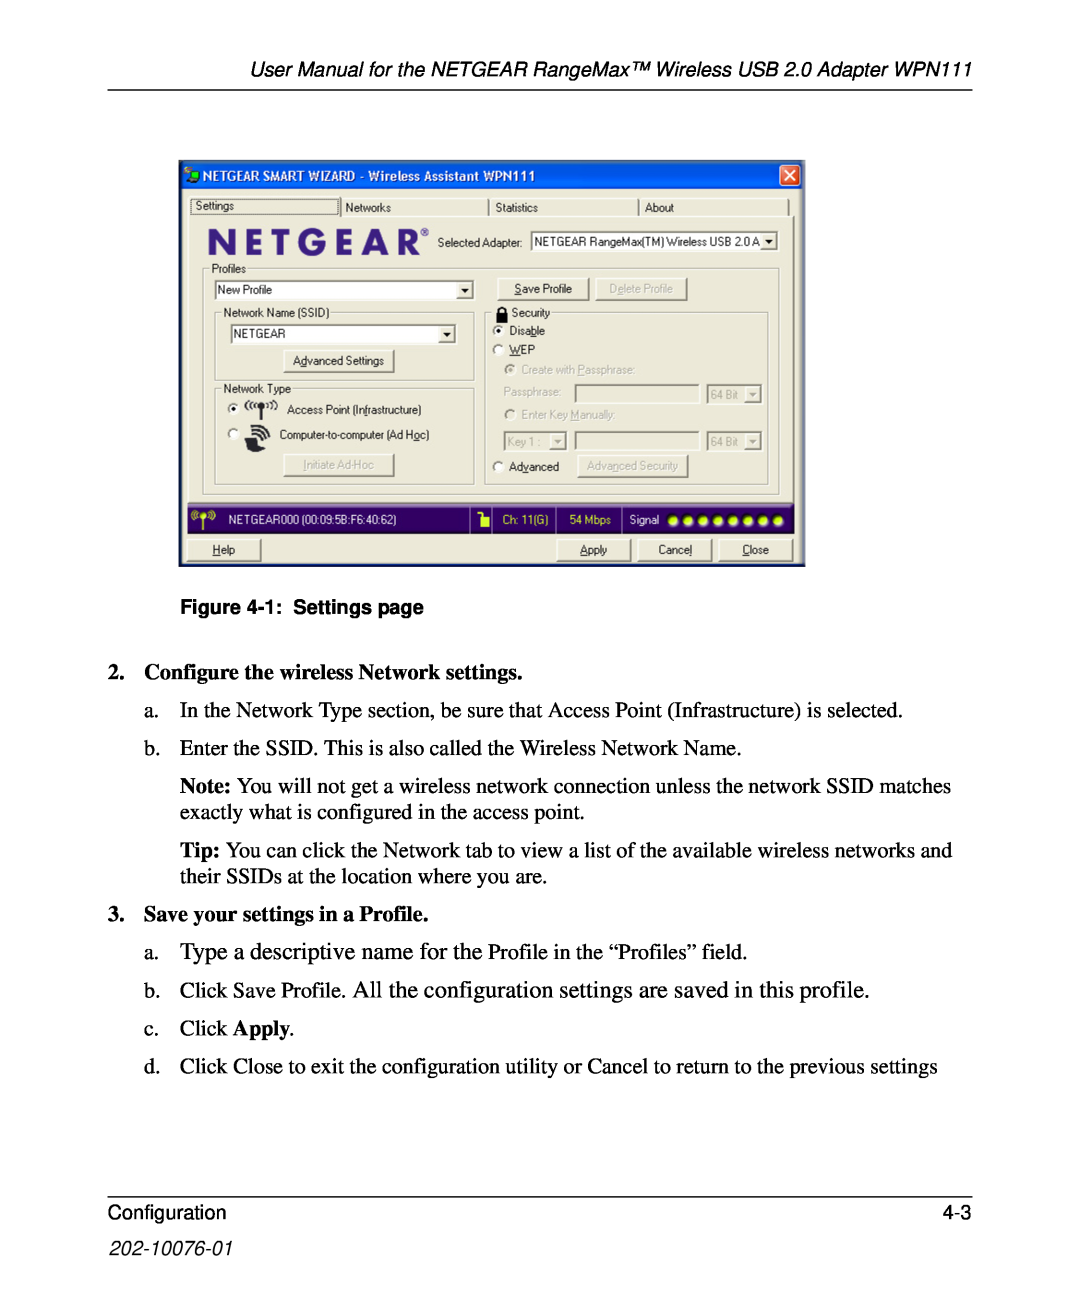 NETGEAR WPN111 a. Type a descriptive name for the Profile in the “Profiles” field, Configure the wireless Network settings 